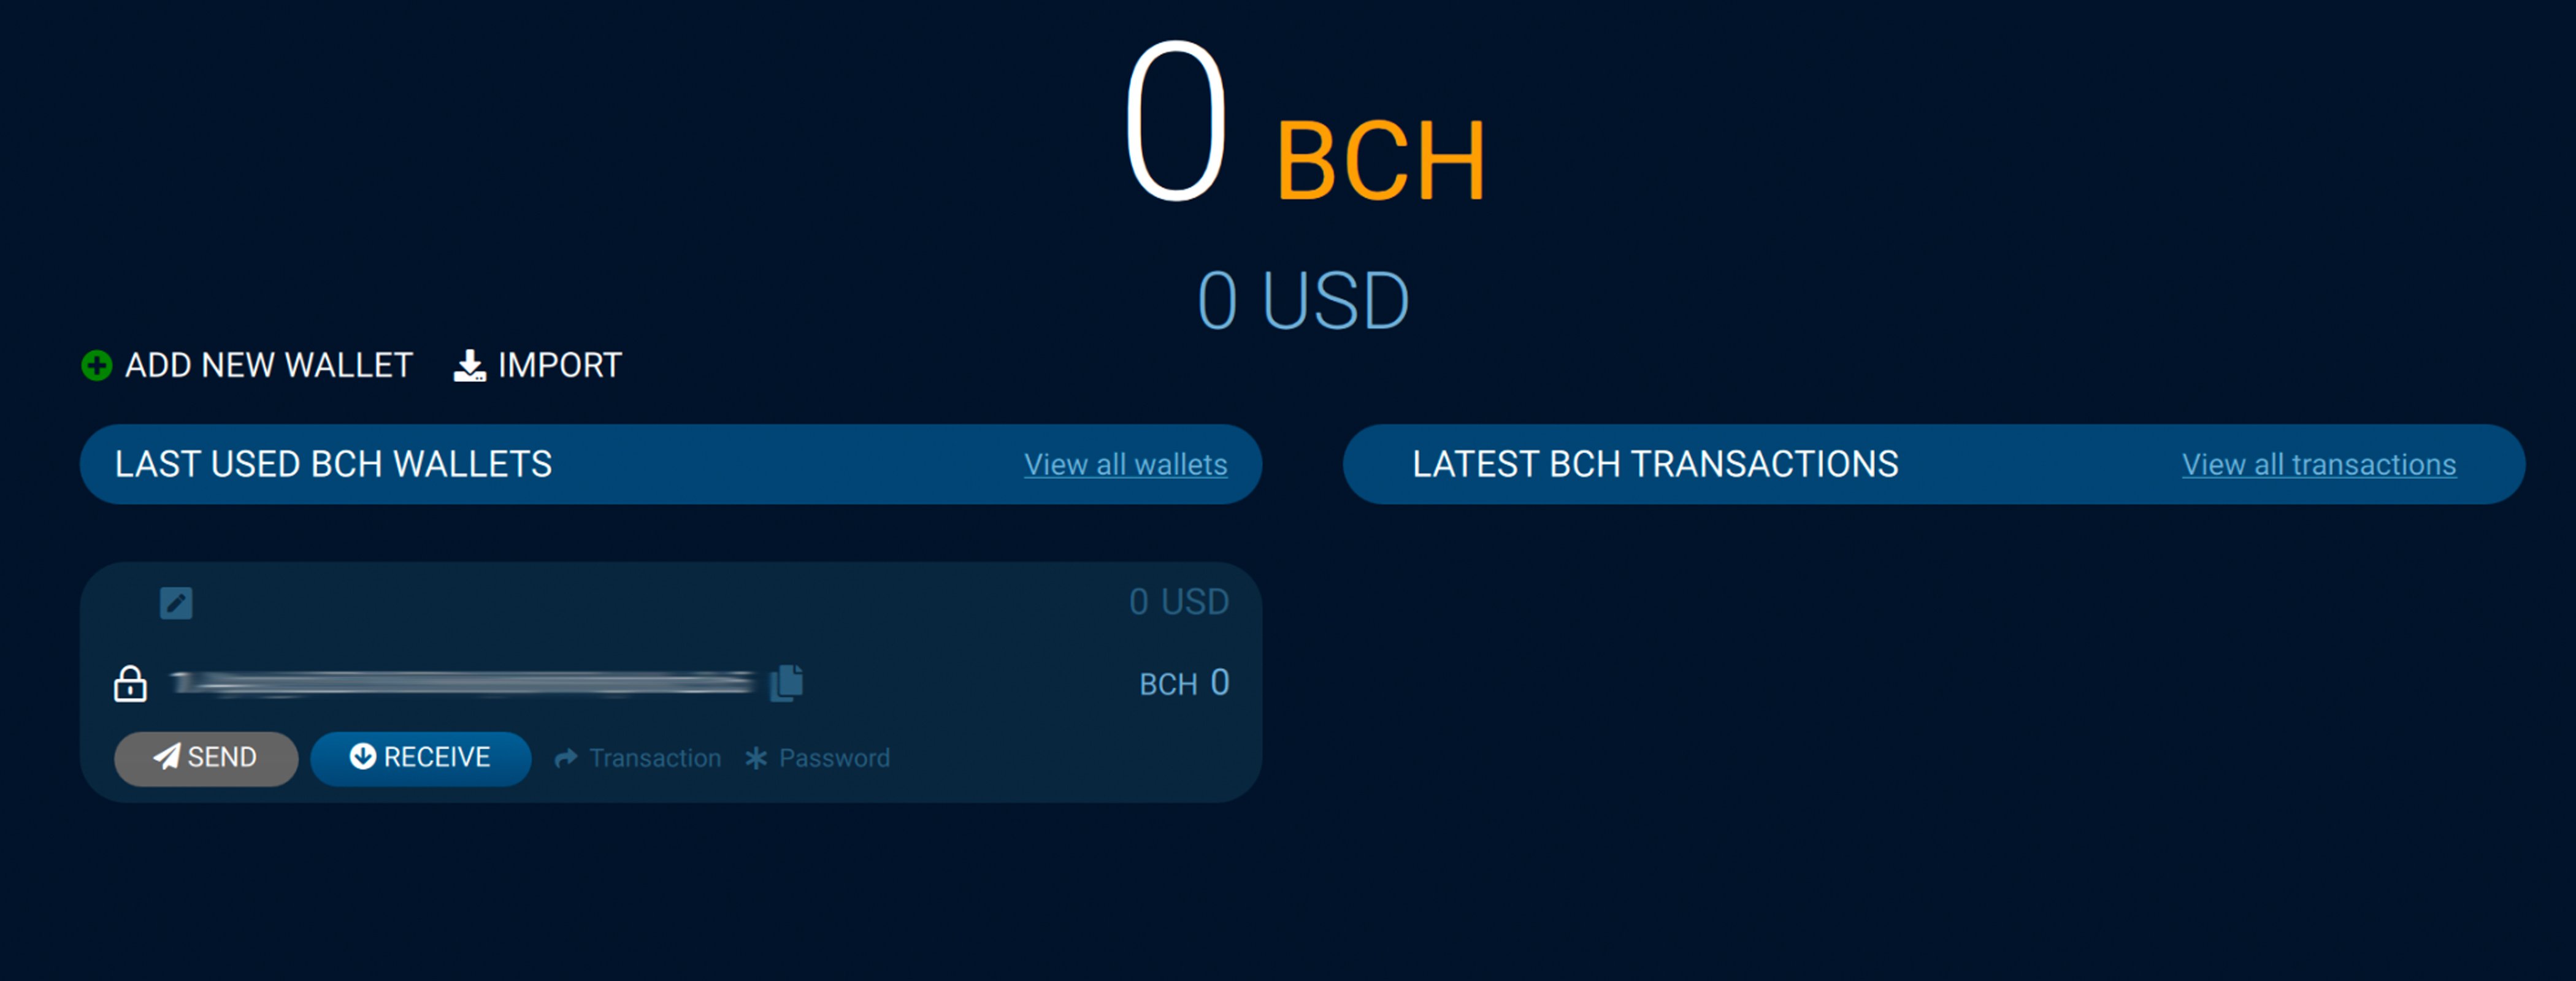 Review: BC Vault Is an Unorthodox Hardware Wallet With a Random Key Generator